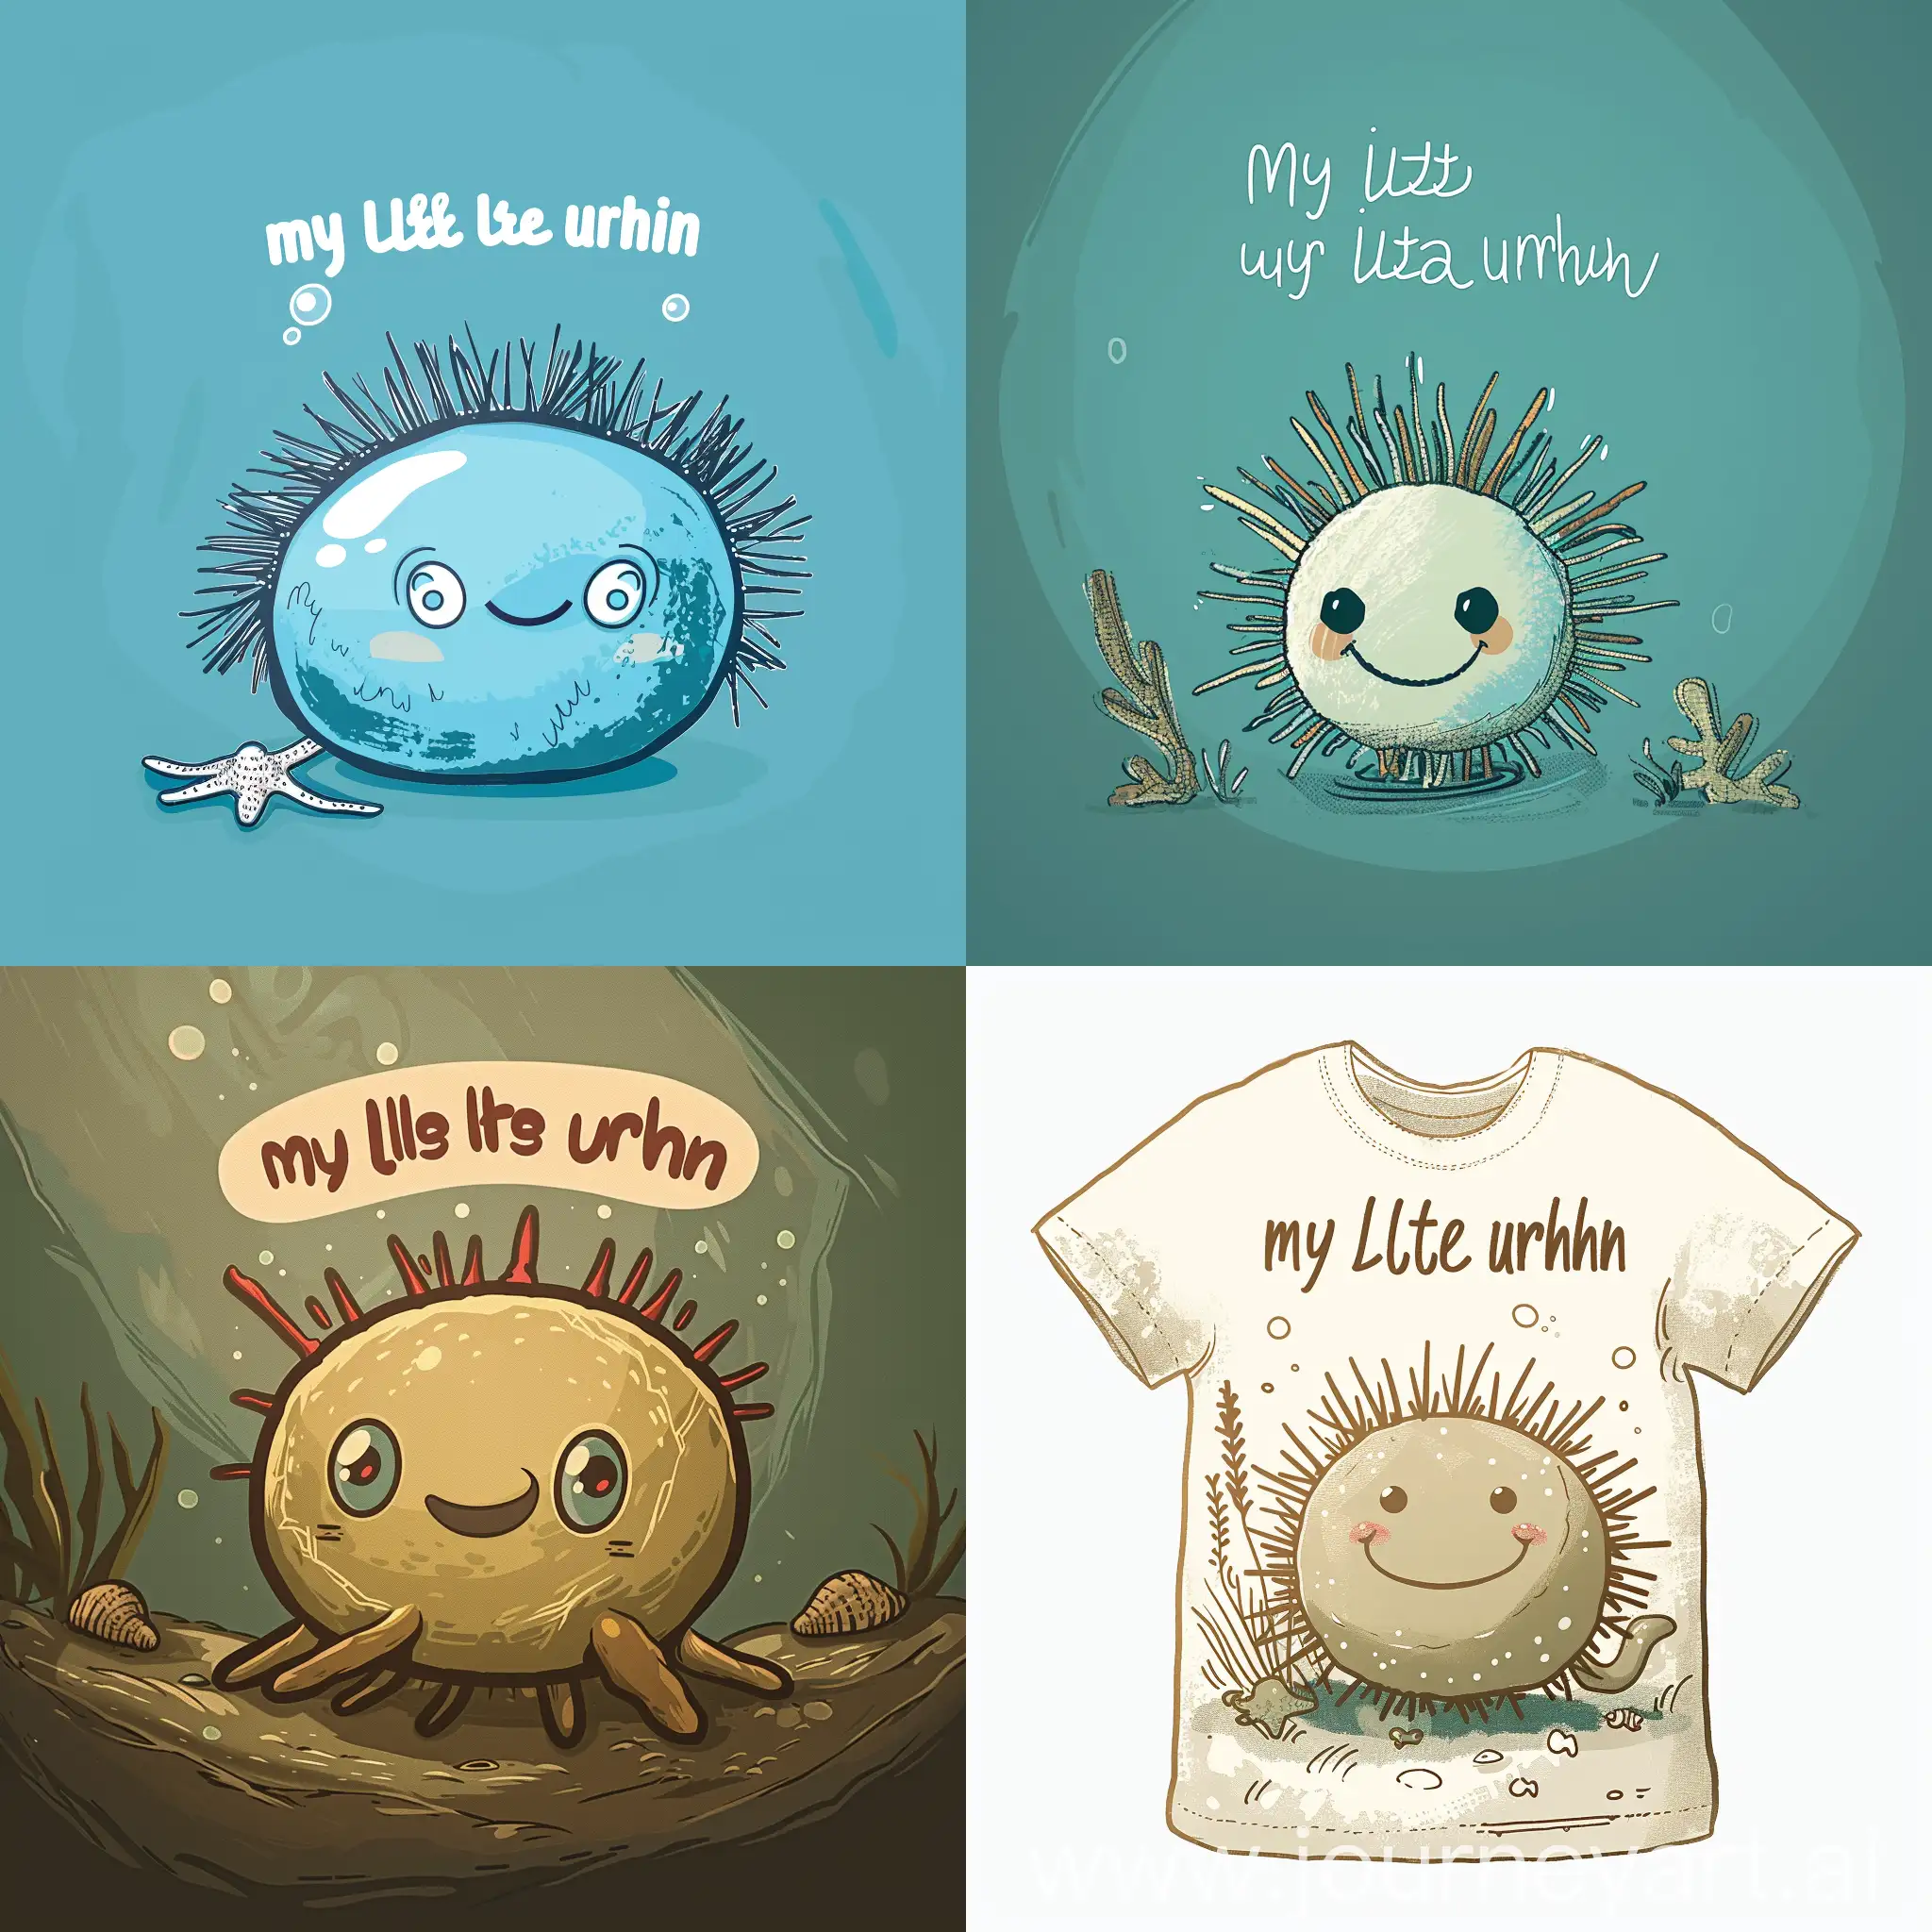 
Design for a Kids shirt.  

Picture of a cartoon sea urchin with a smiley face

writing above the urchin to say

my little urchin